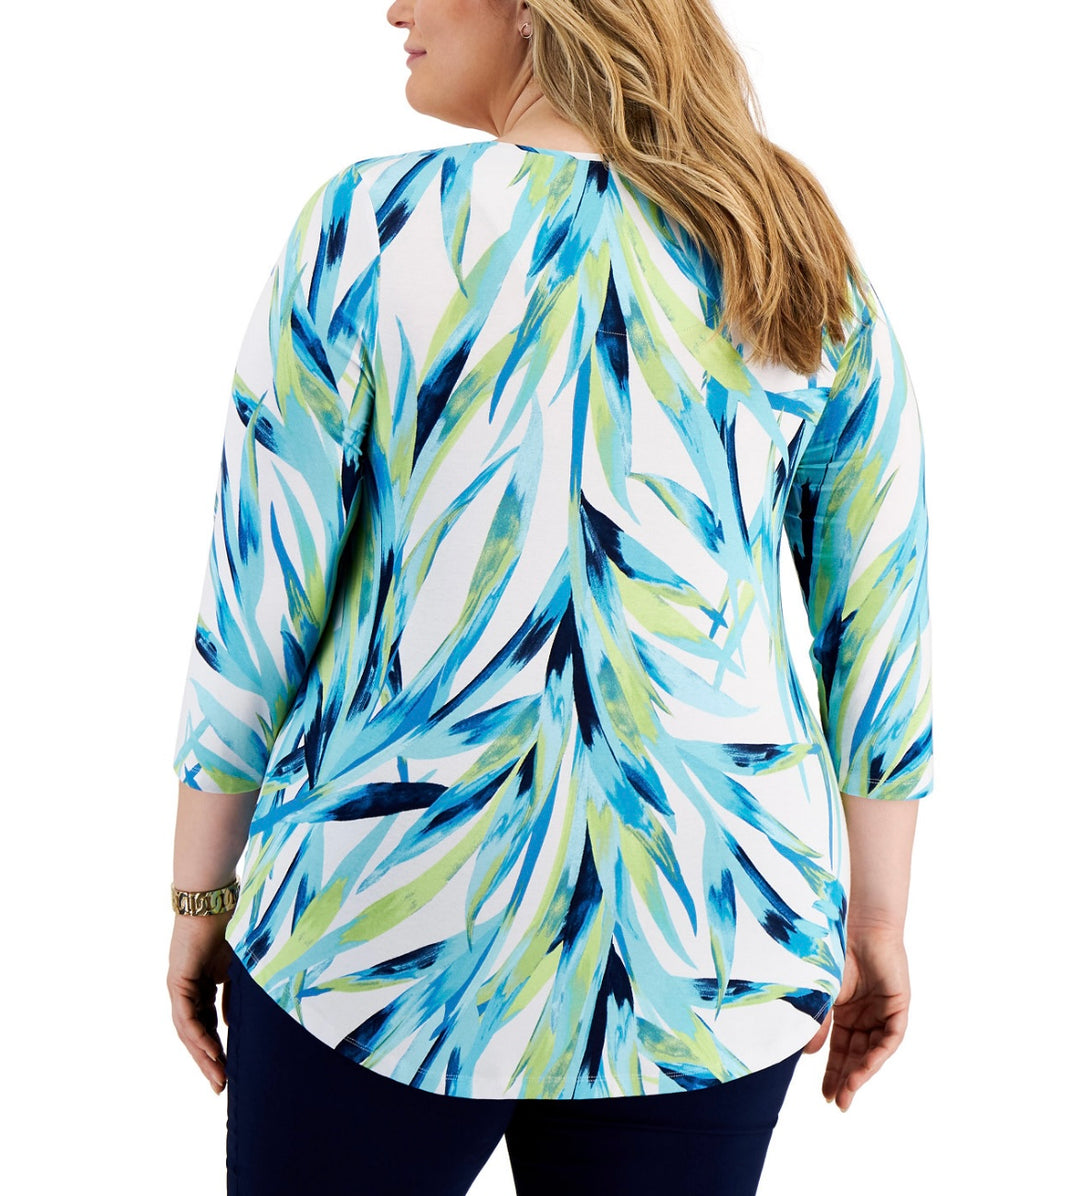 JM Collection Women's Printed 3/4-Sleeve Top Bright White Combo Plus Size 3X